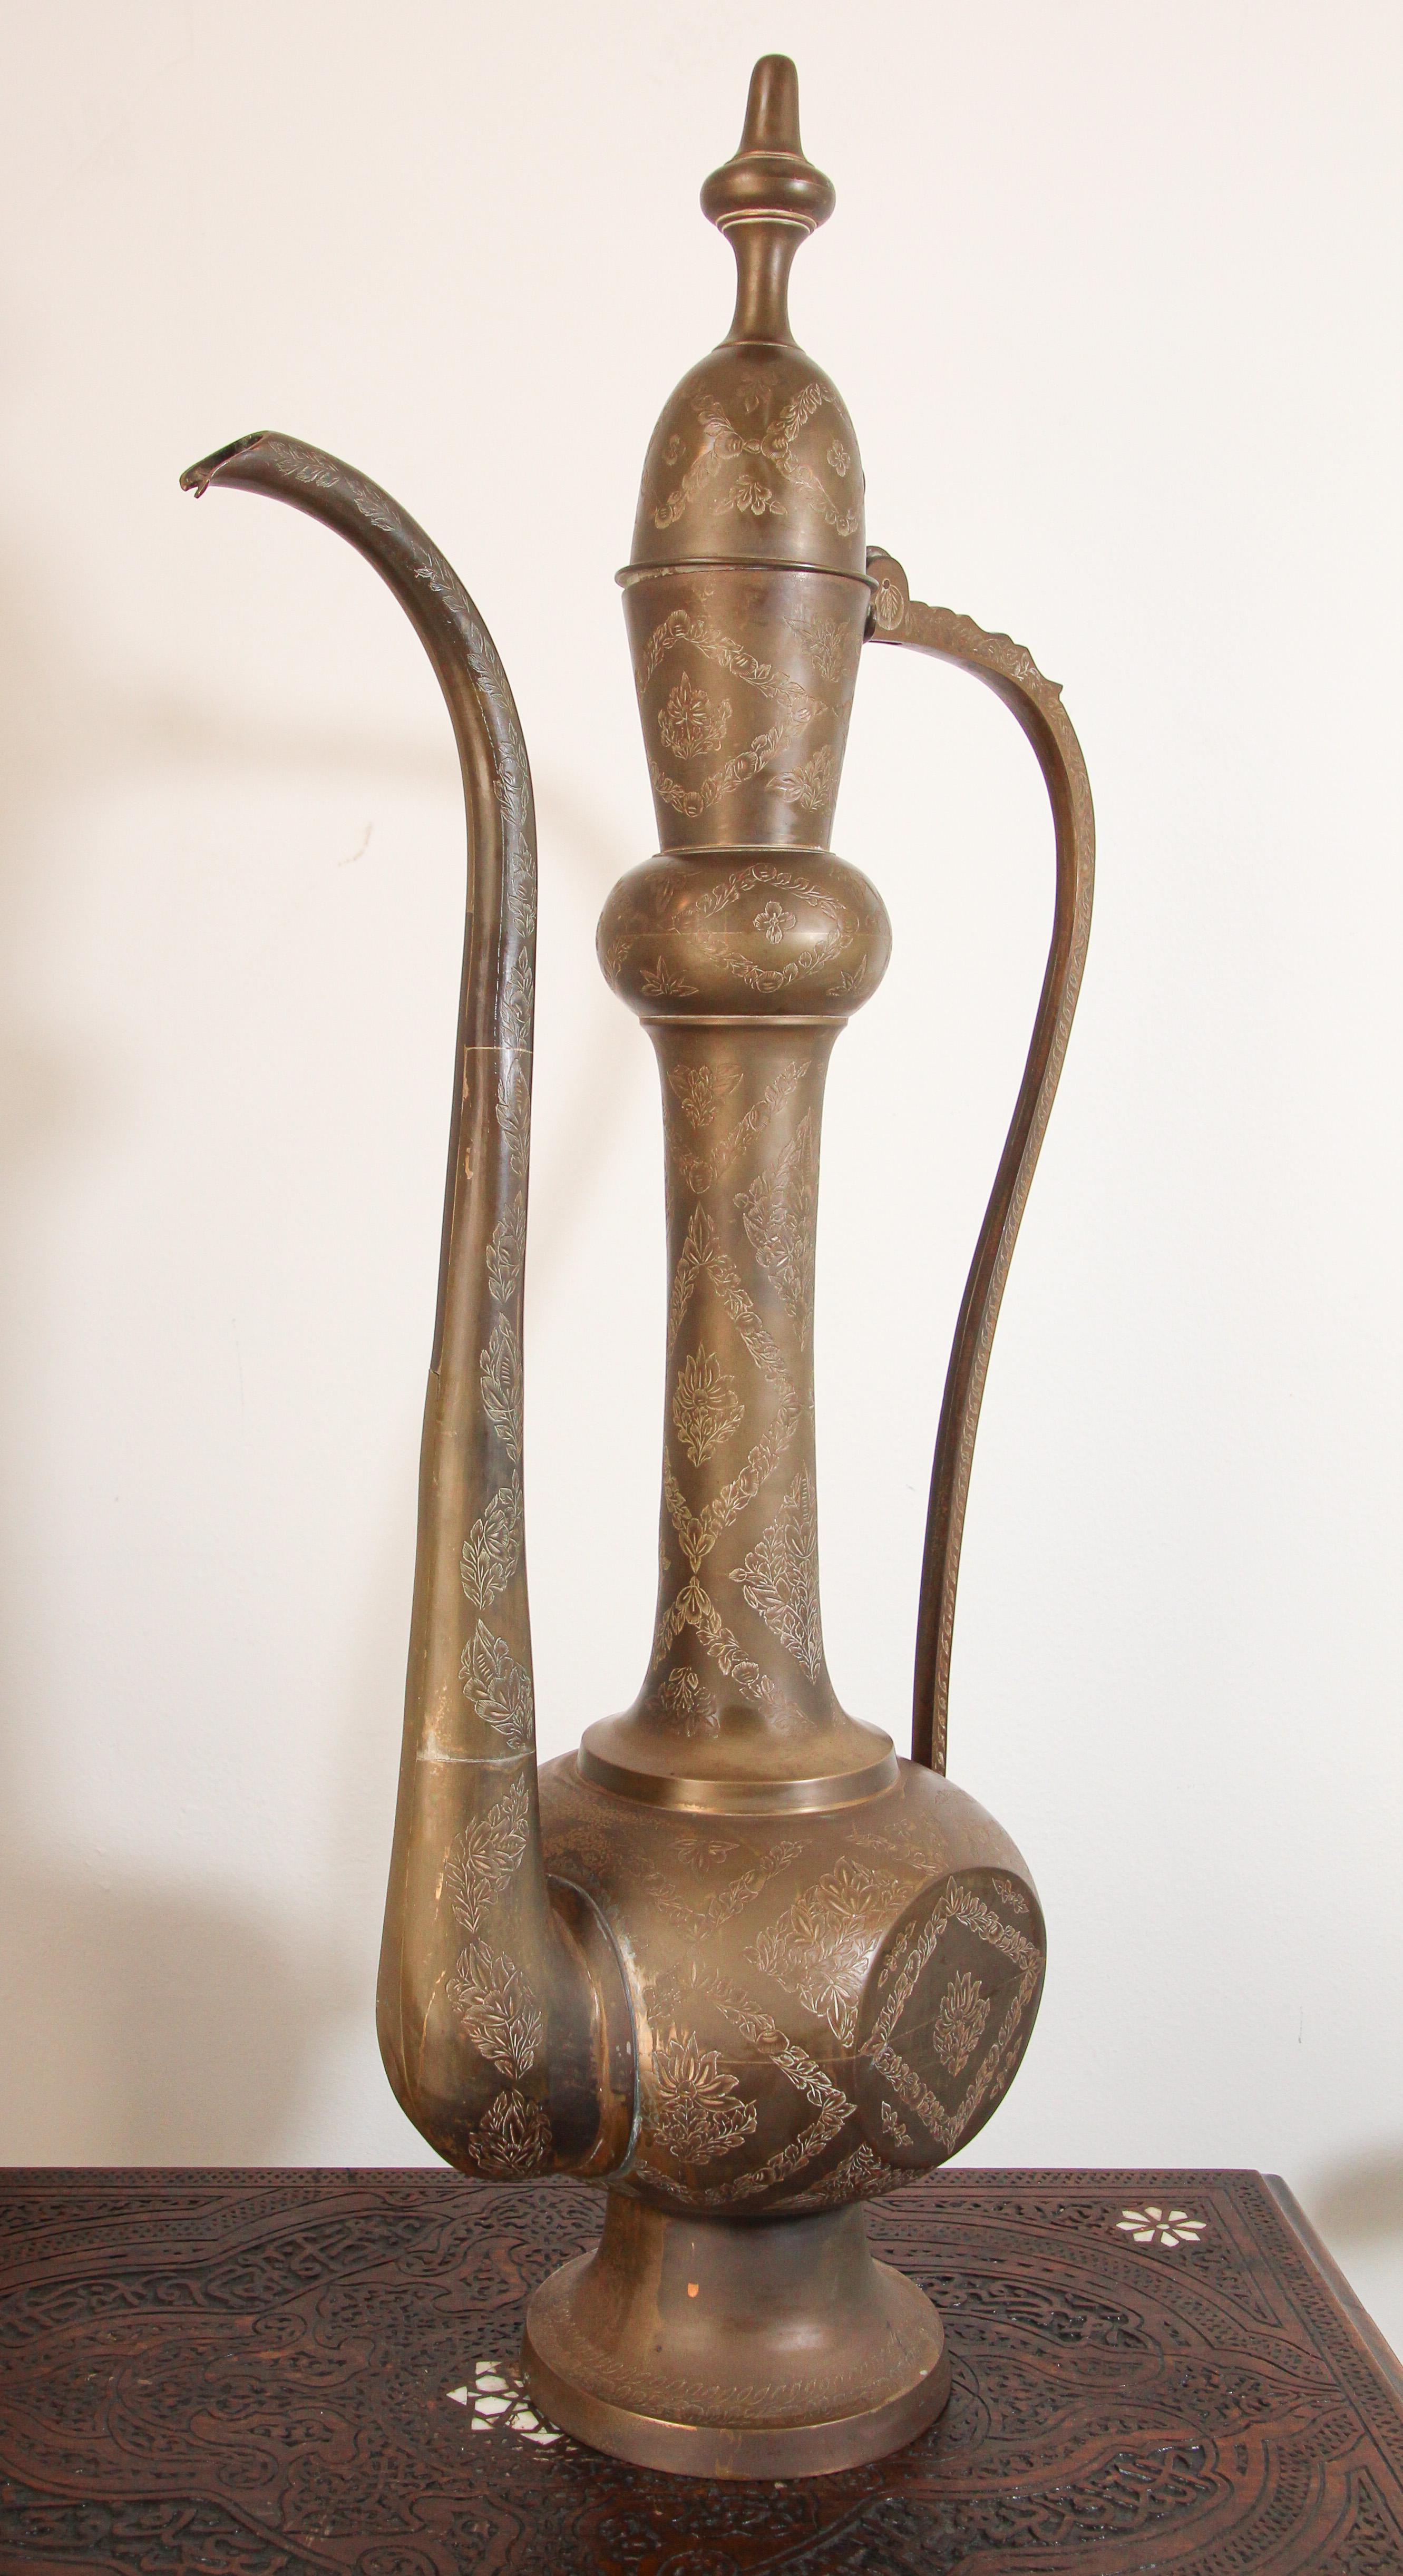 Oversized 3 feet tall Middle Eastern, Mughal Indian style brass decorative ewer.
Very decorative handcrafted brass Moorish Arabian style coffee pot, wine or water pitcher.
Hand-hammered and etched brass with floral intricate Moorish Islamic